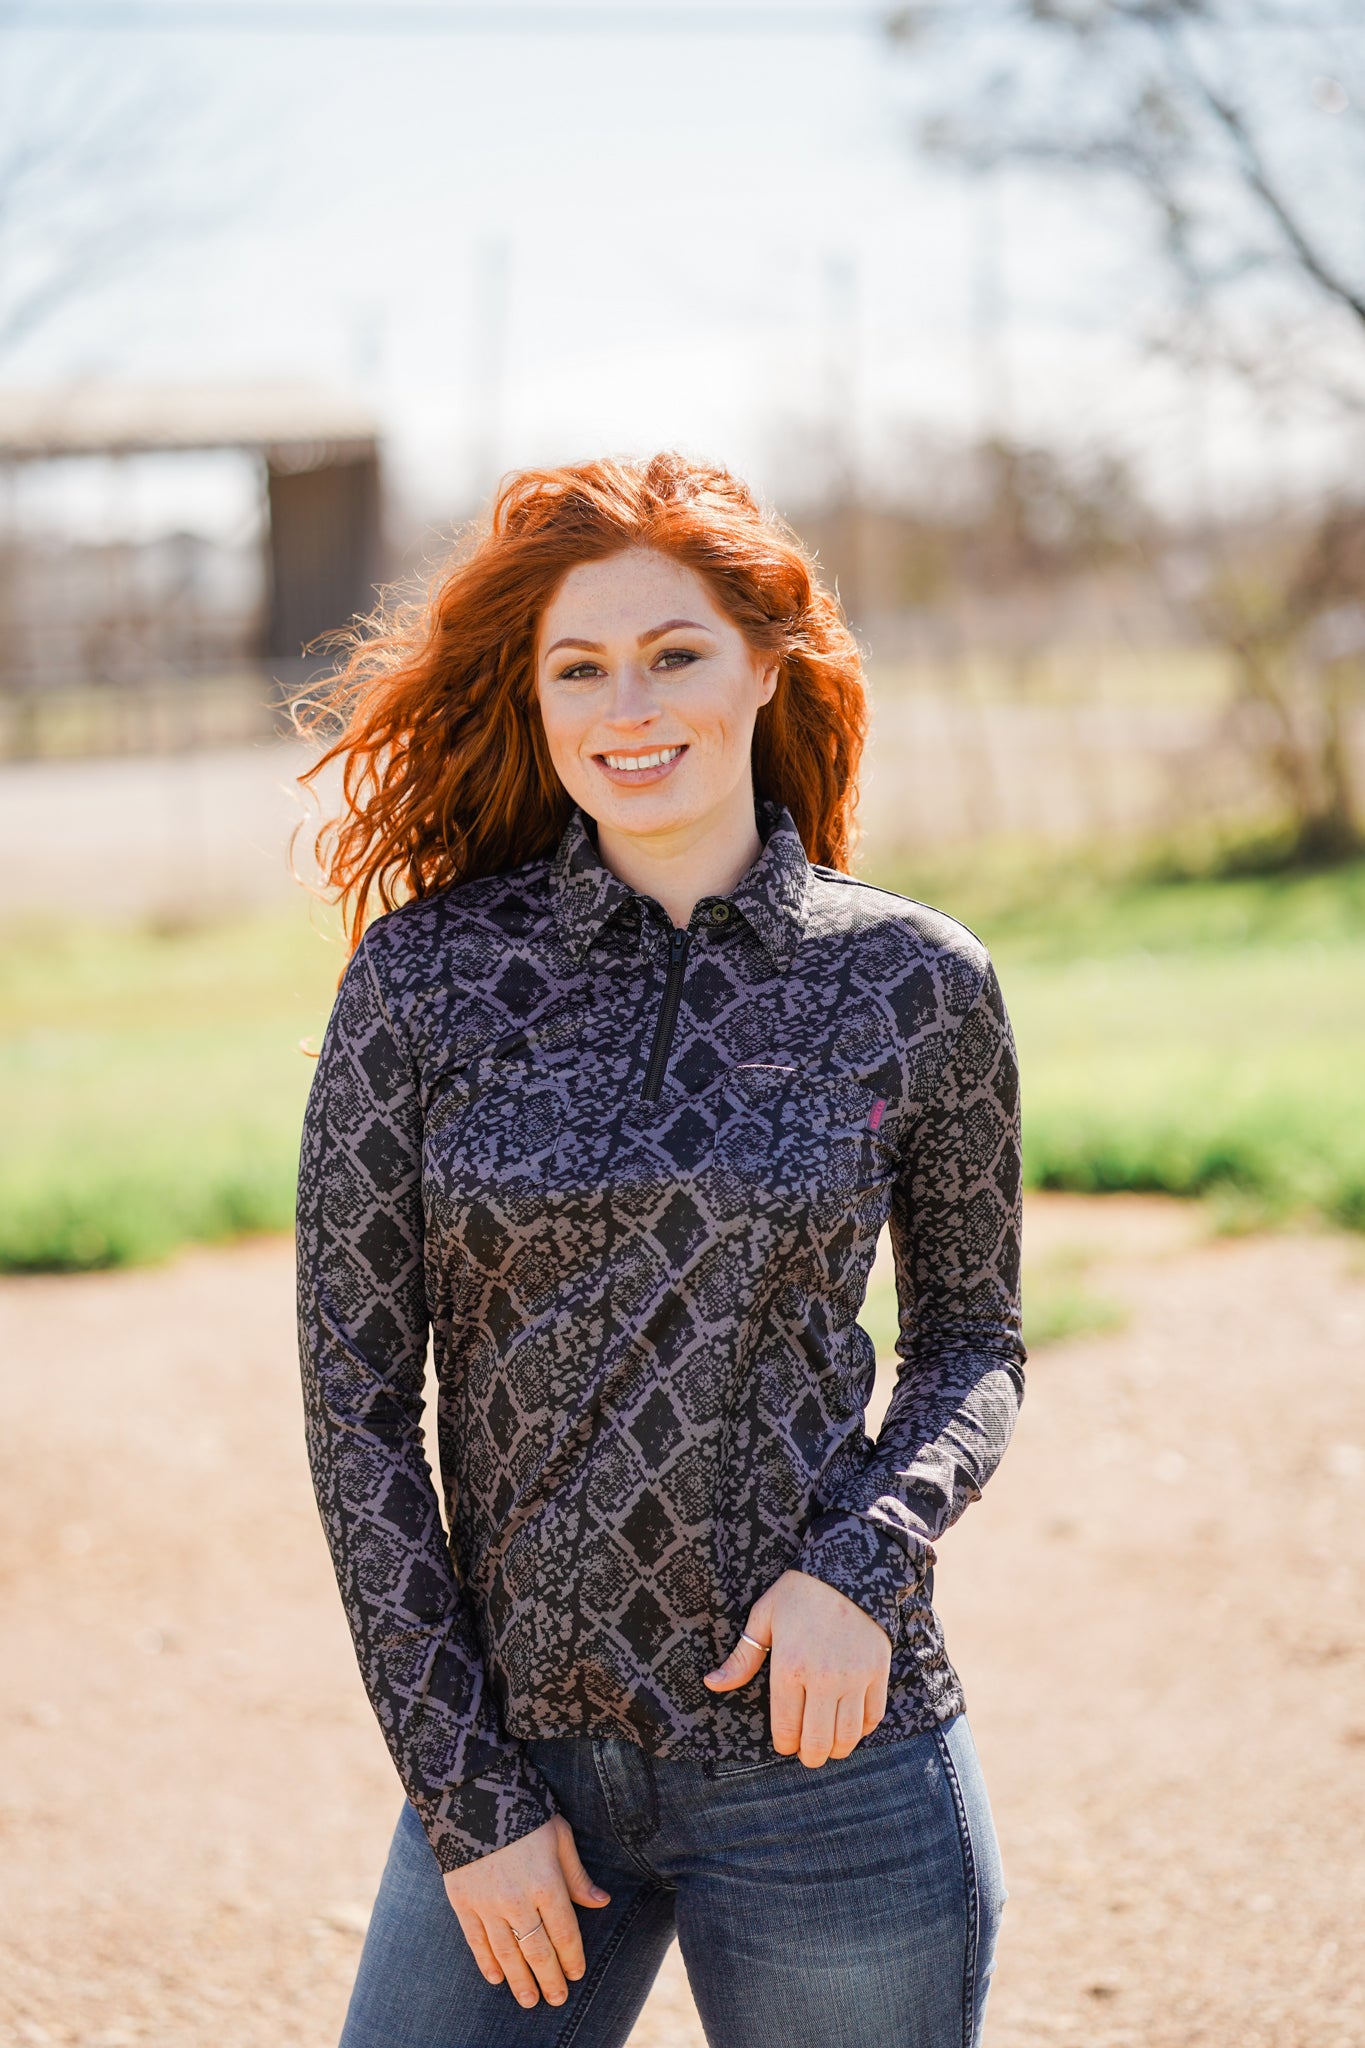 The Arena Snake Core Knit Shirt - Pistols and Petticoats